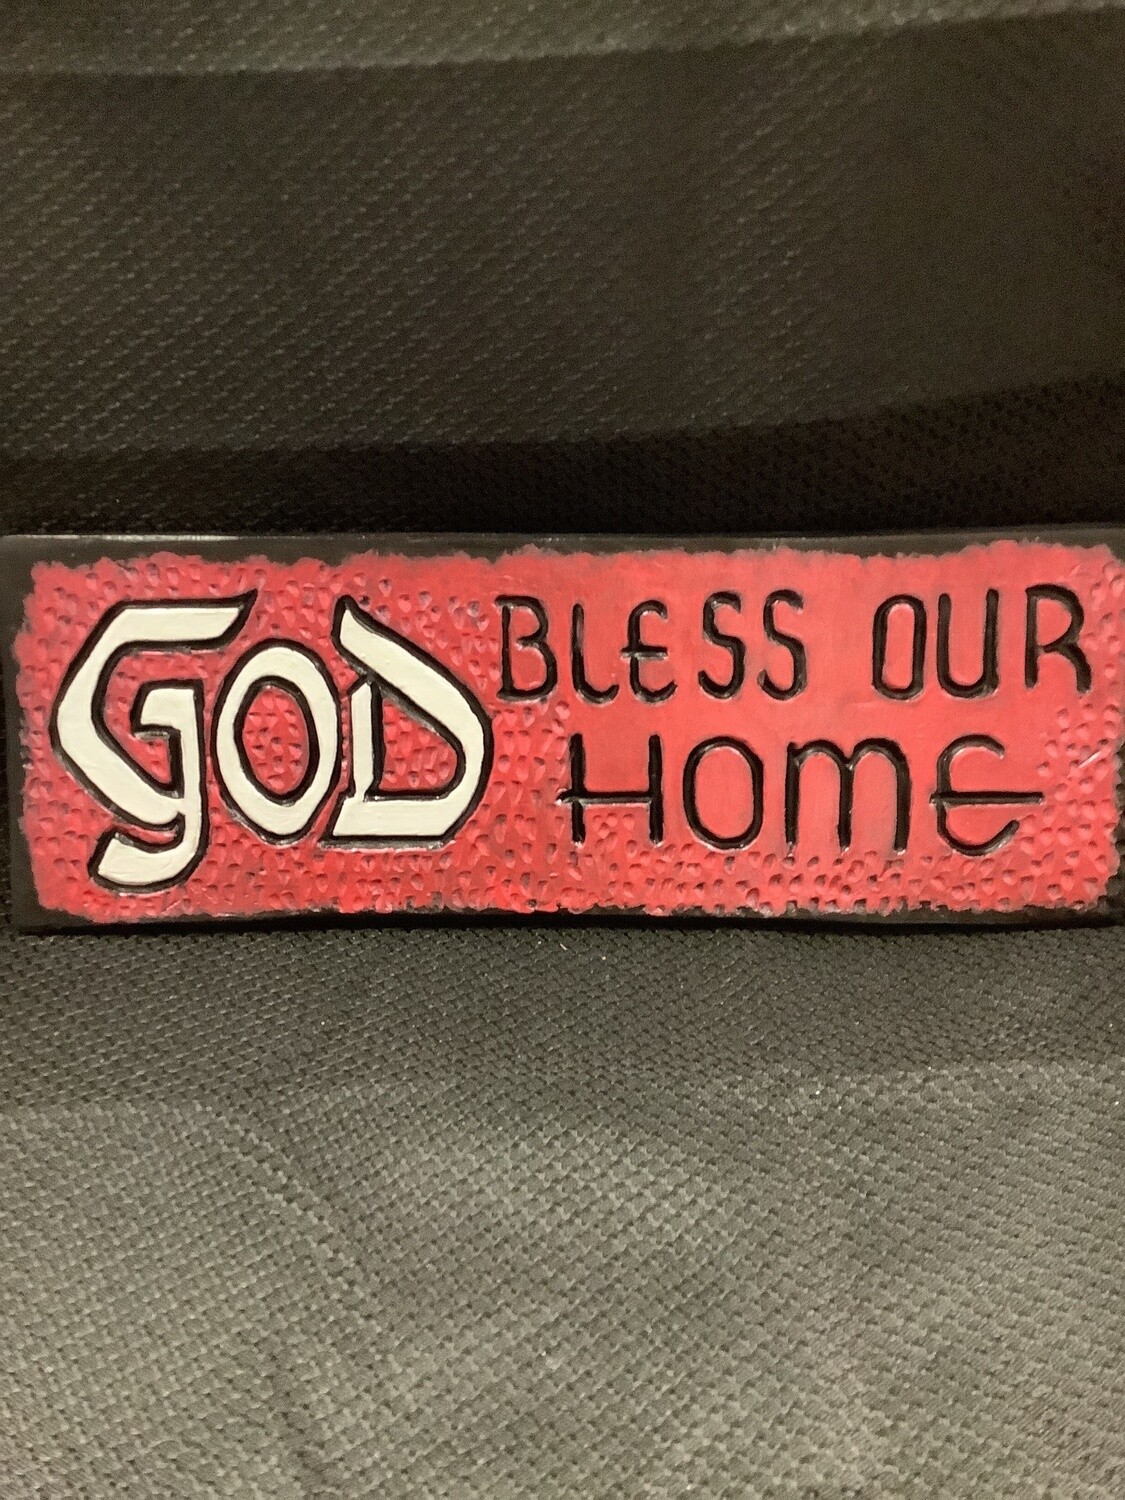 God Bless Our home